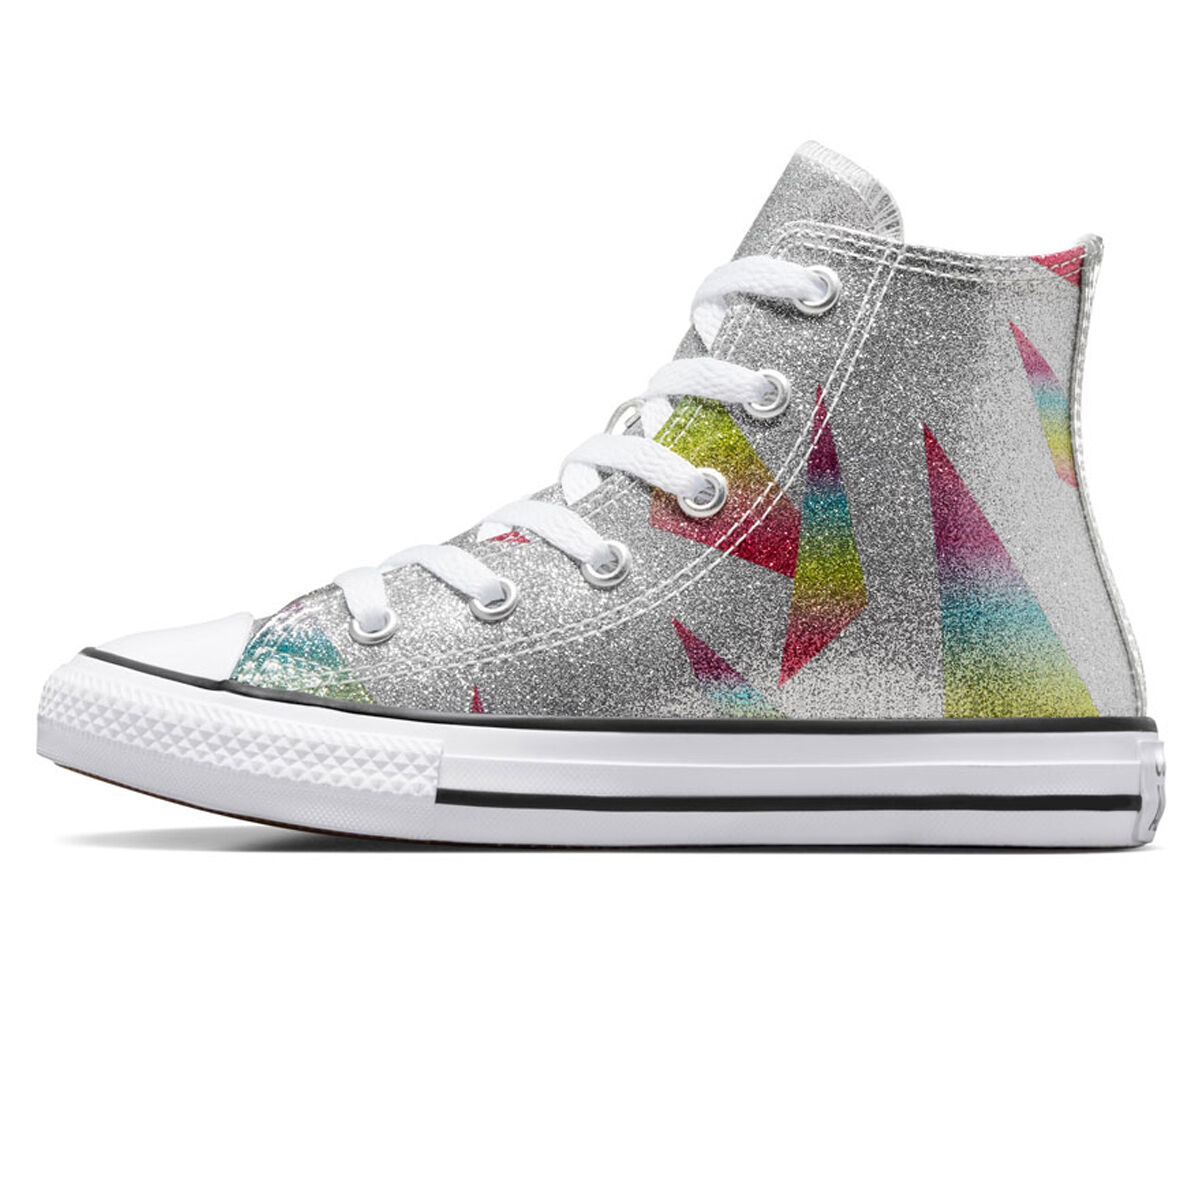 Converse Chuck Taylor All Star High Prism Glitter Kids Casual Shoes